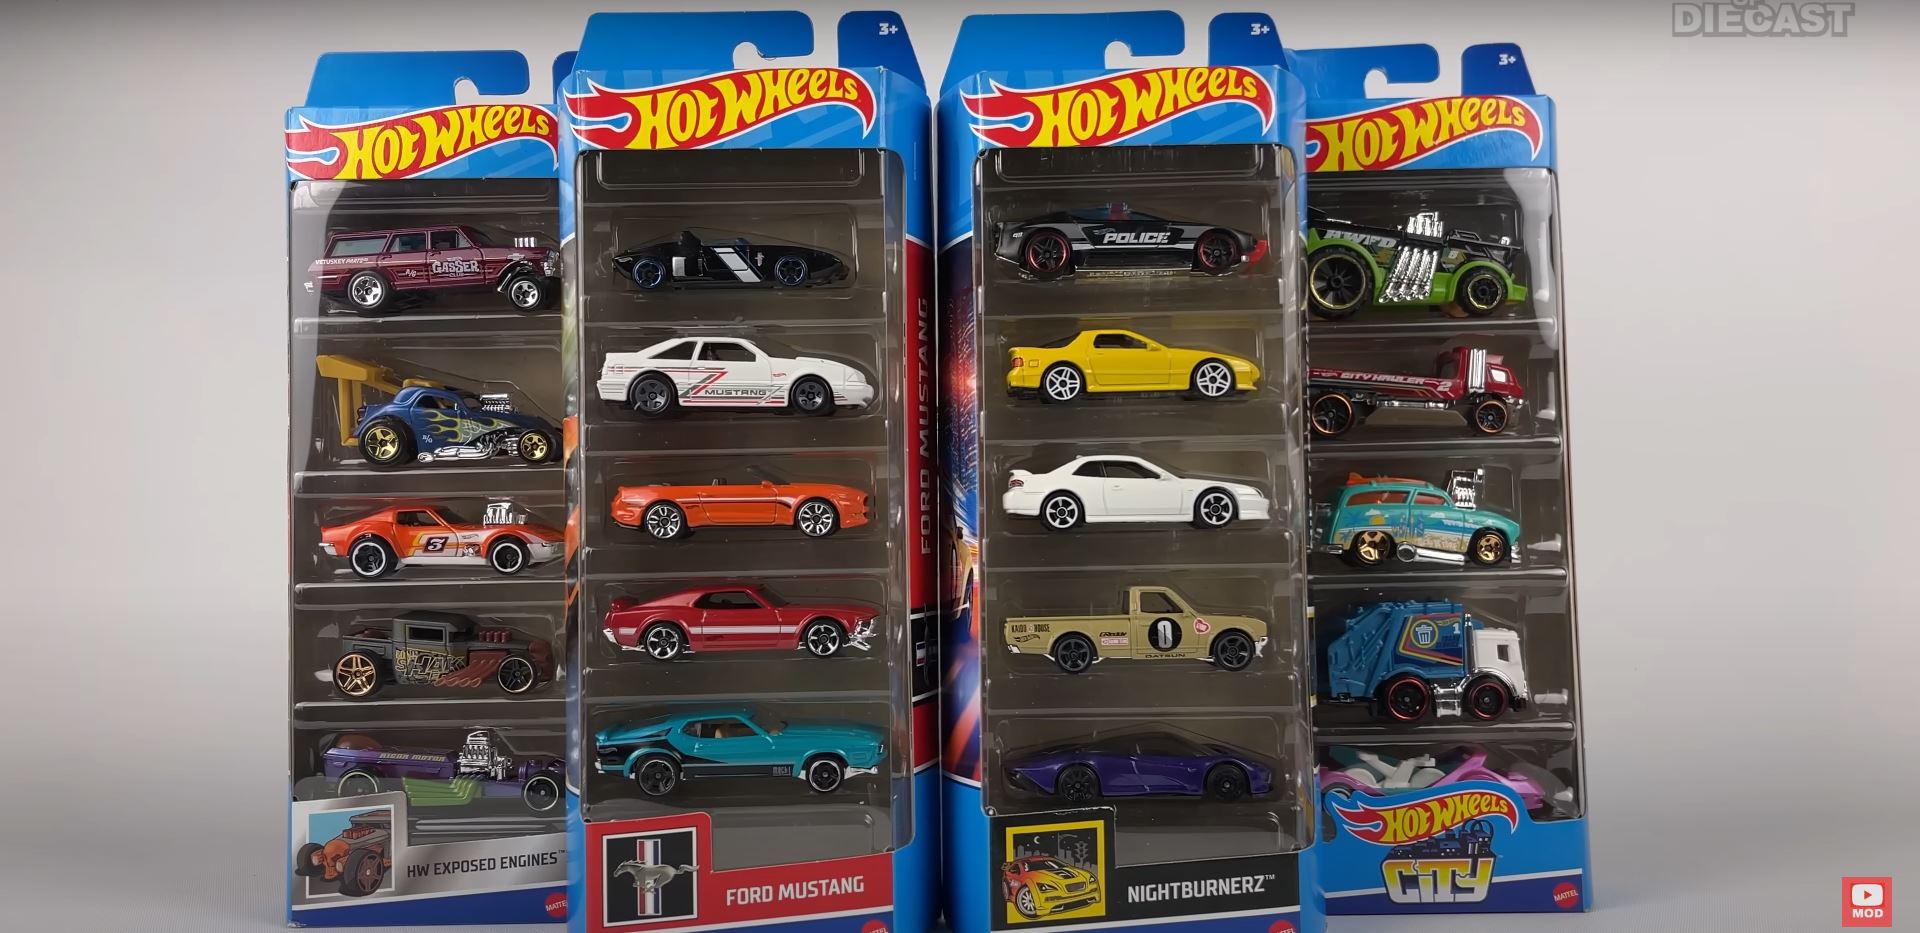 Hot Wheels Celebrates the Ford Mustang With a New 5Pack, There Are